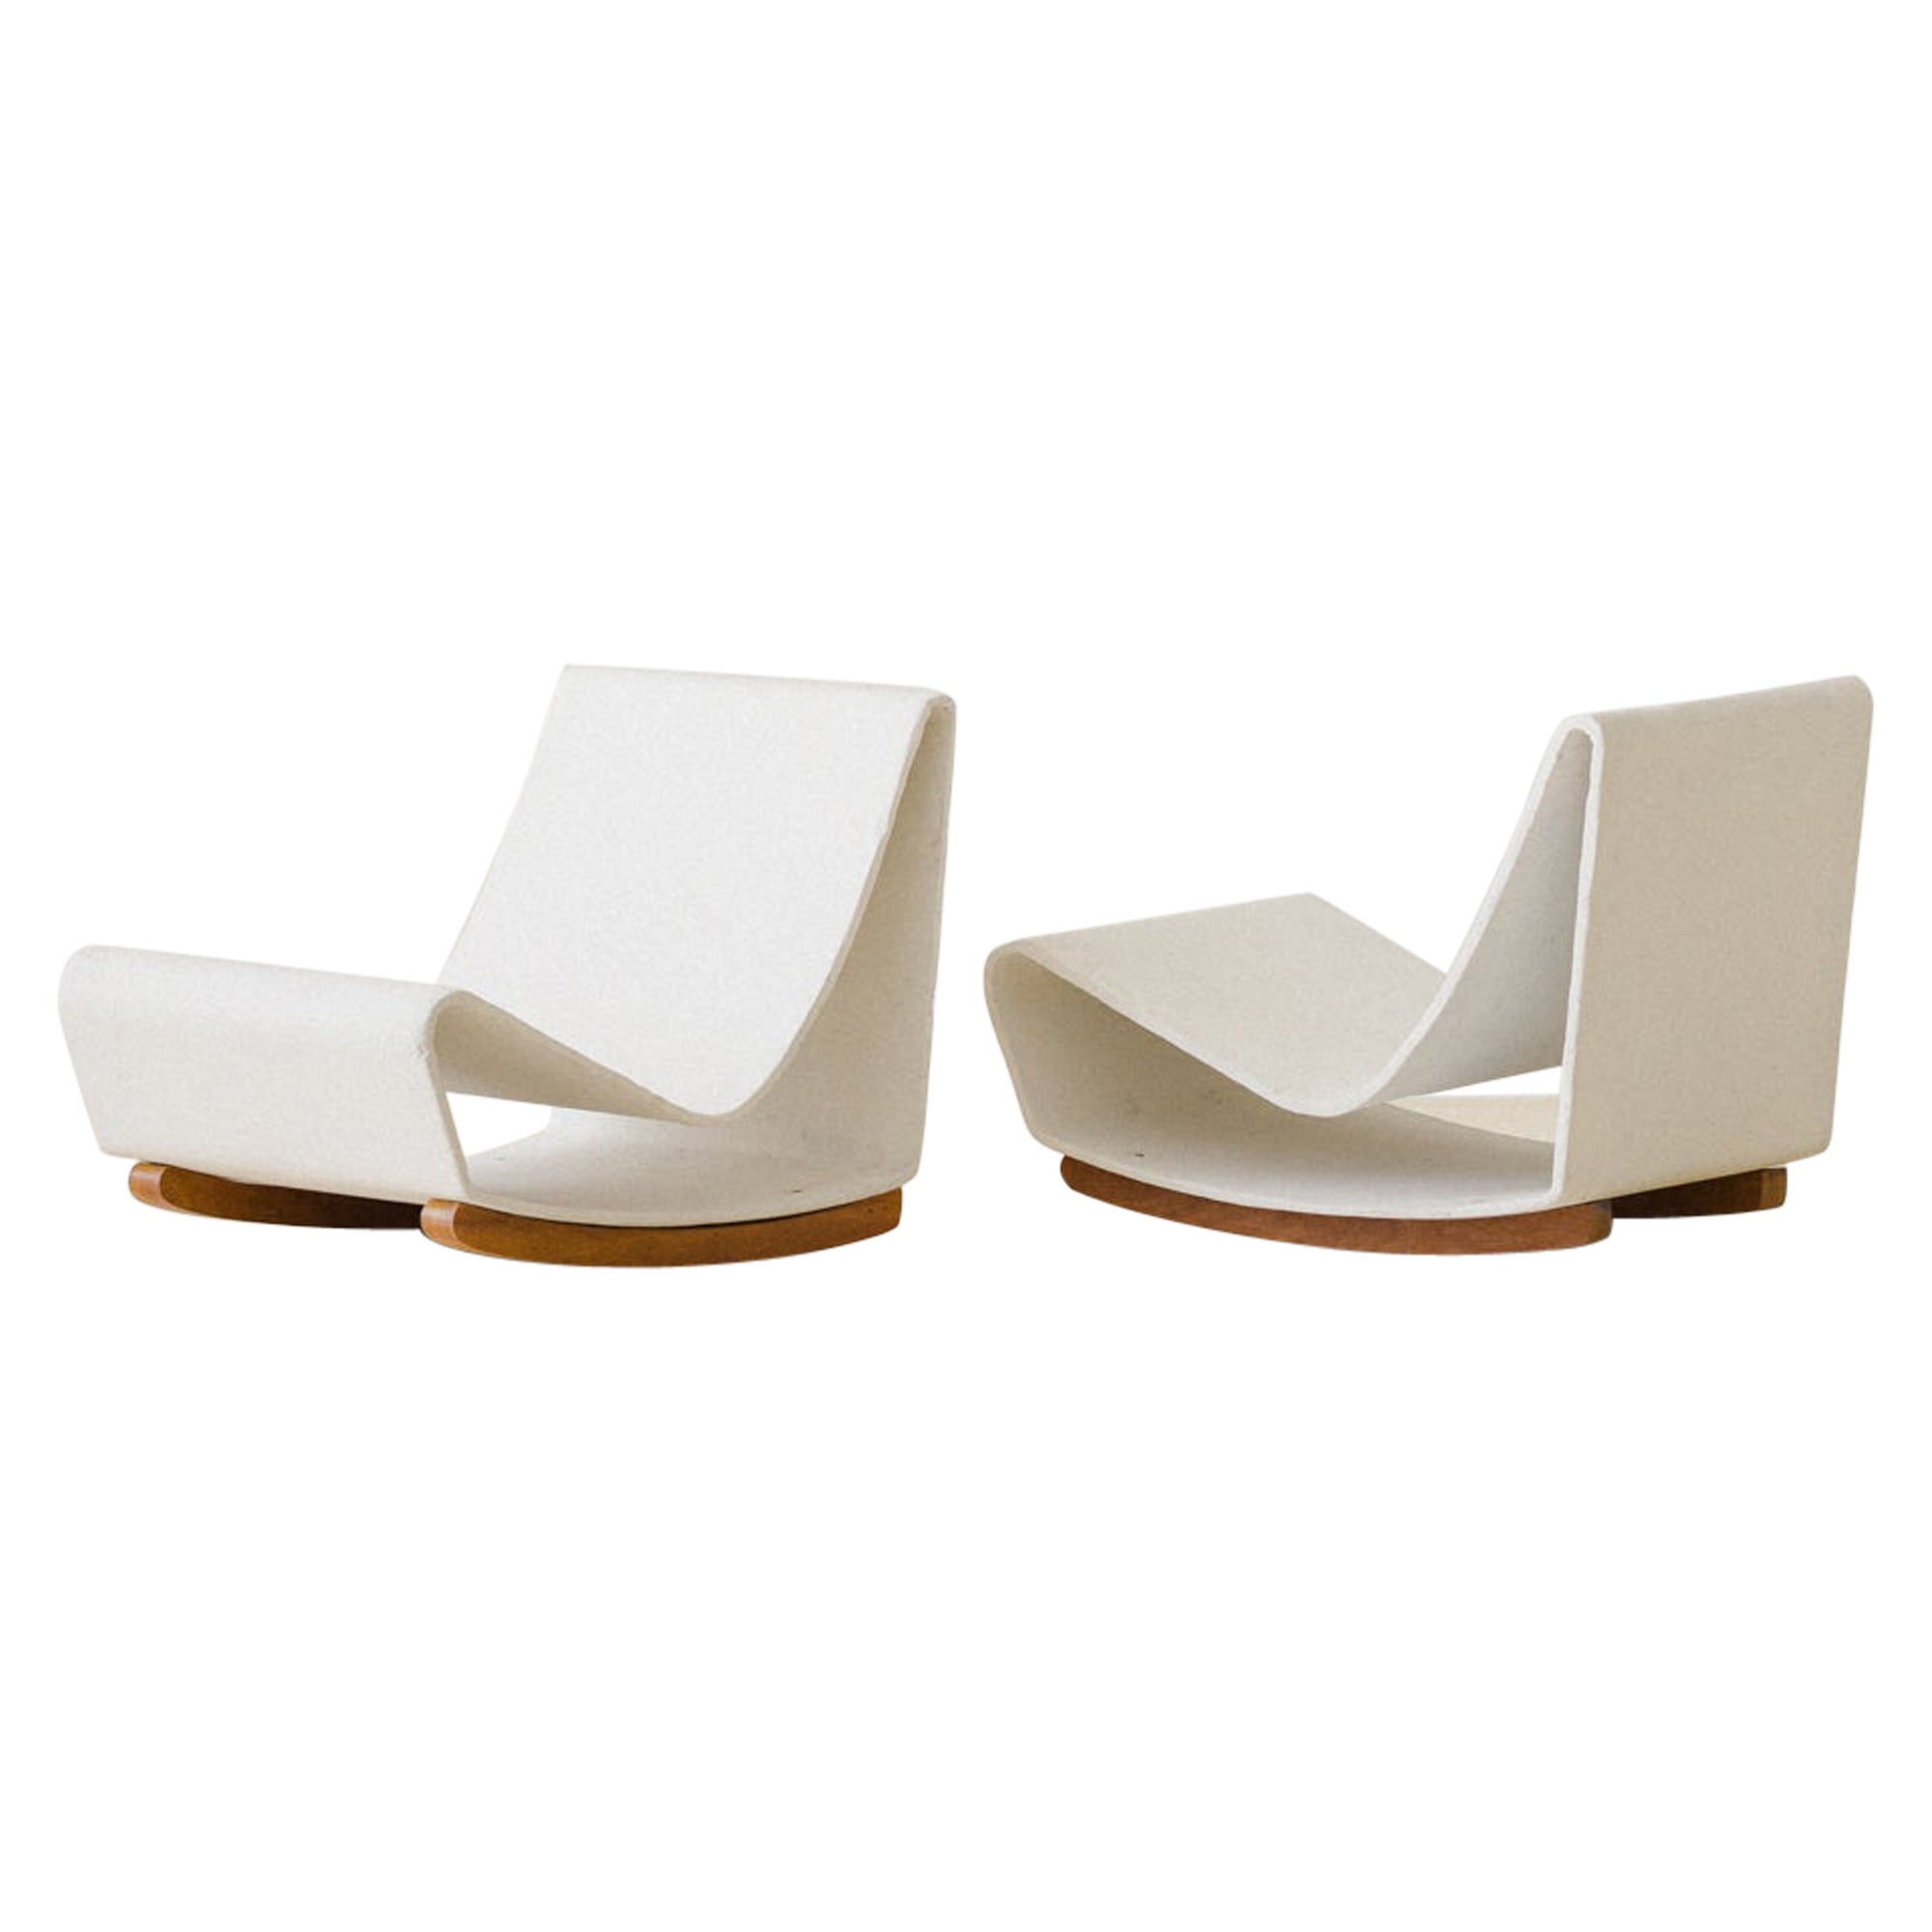 Pair of "Loop Chairs" by Willy Guhl, Produced by Eternit Brazil, 1960s For Sale